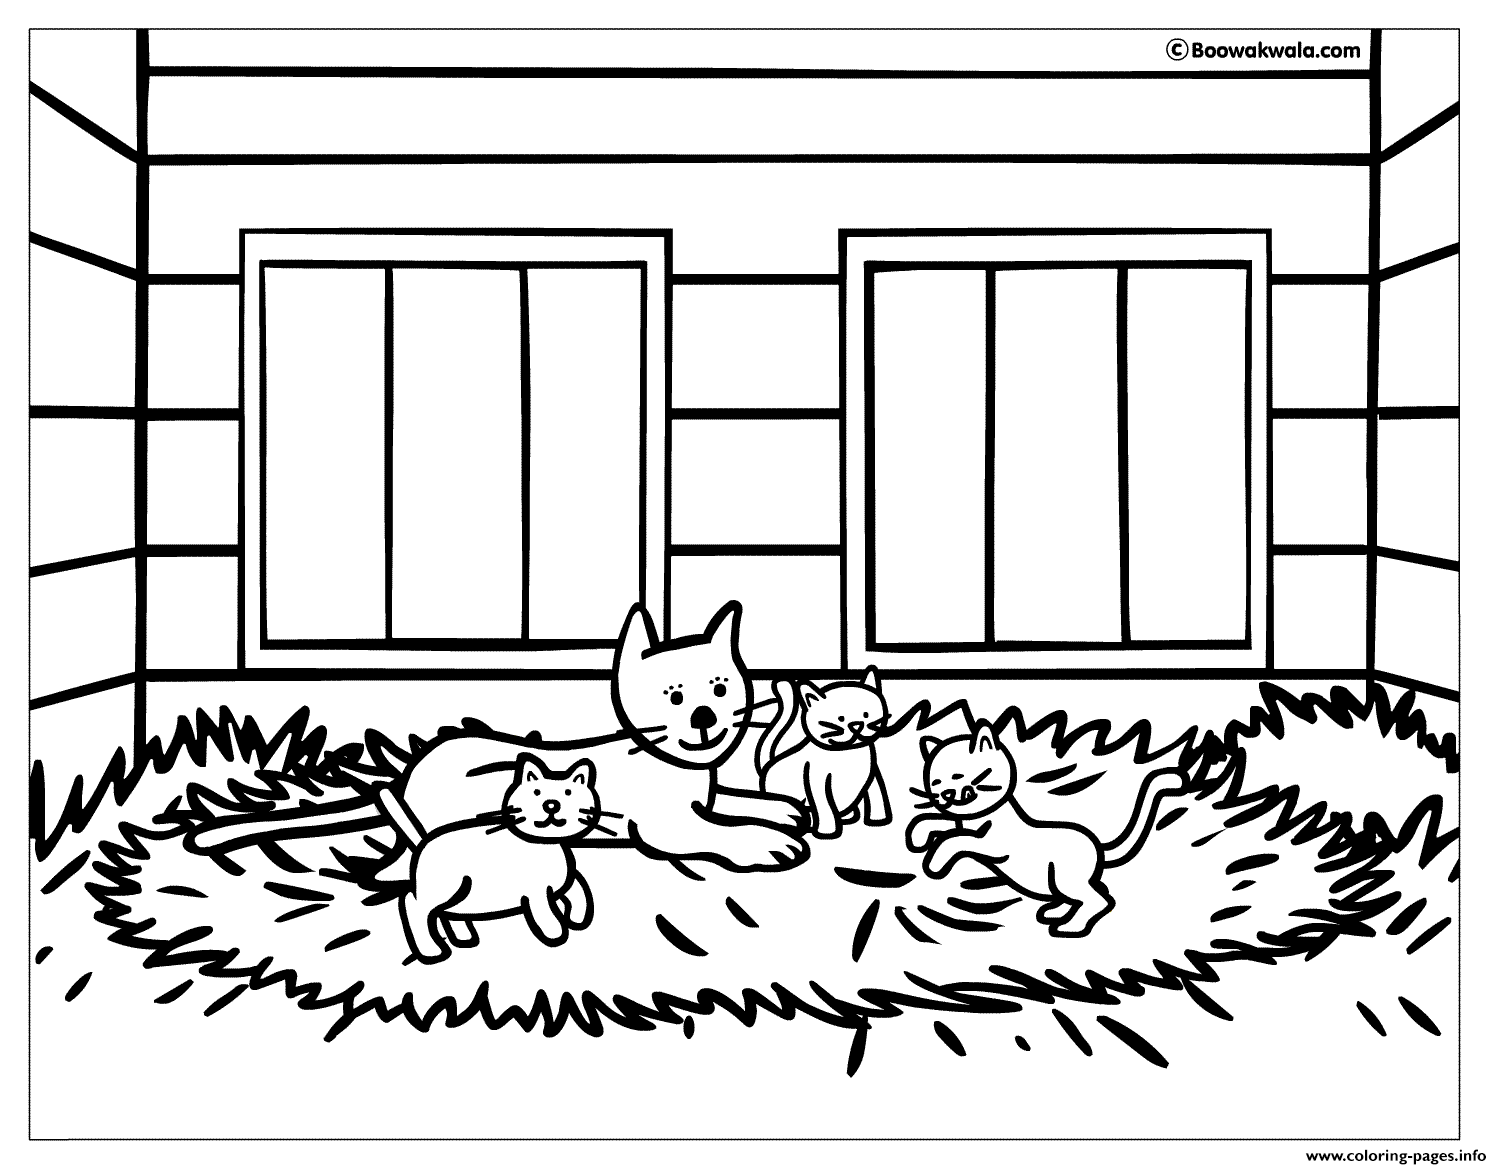 Kittens In A Big House coloring pages Print Download 366 prints 2016 07 21 Kitten Coloring Pages